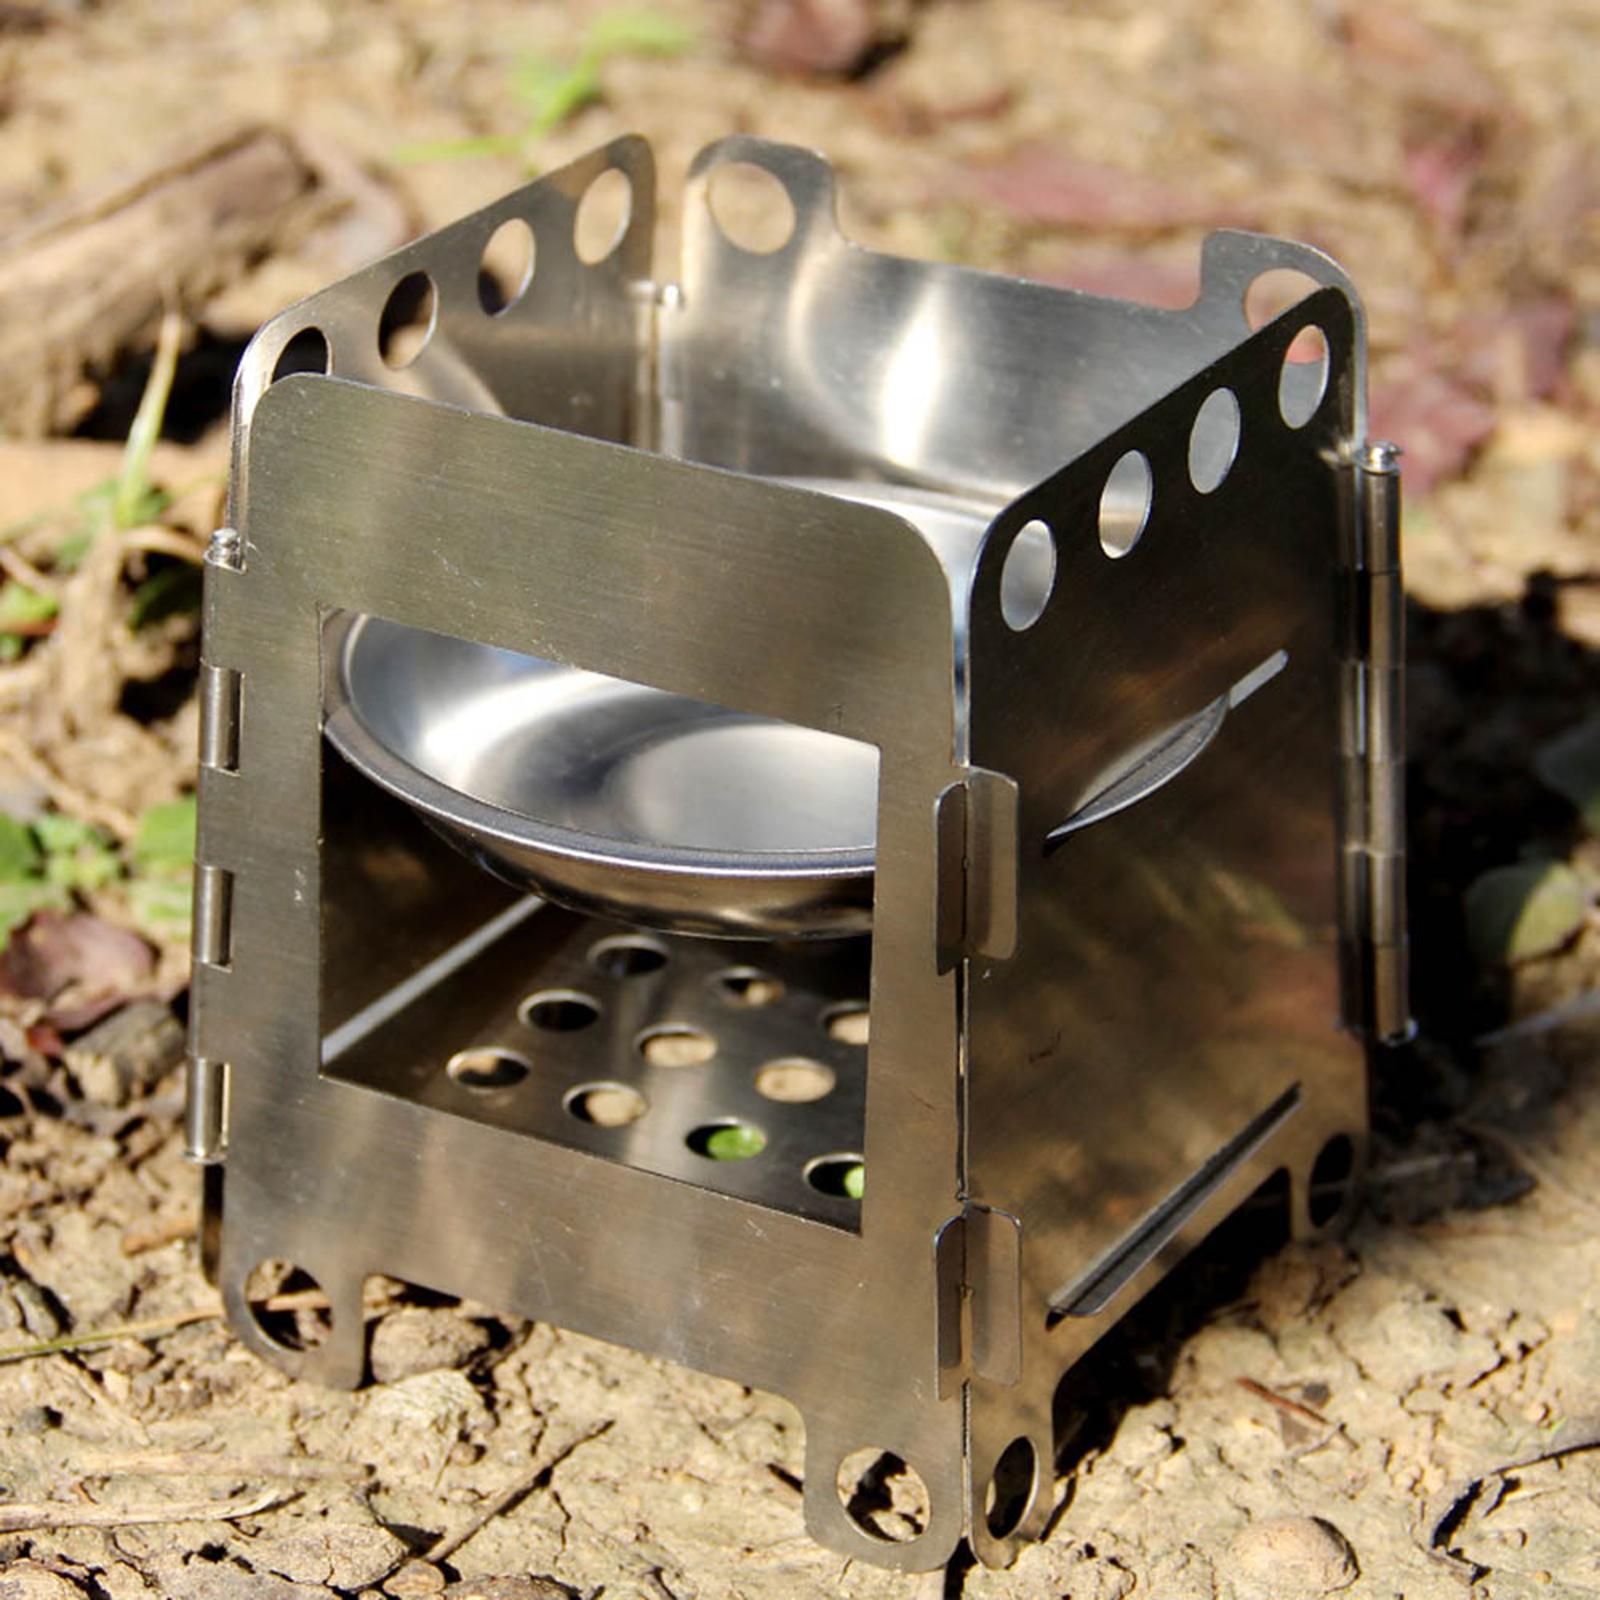 Camping Firewood Alcohol Outdoor Cooking Grill for Hiking Travel